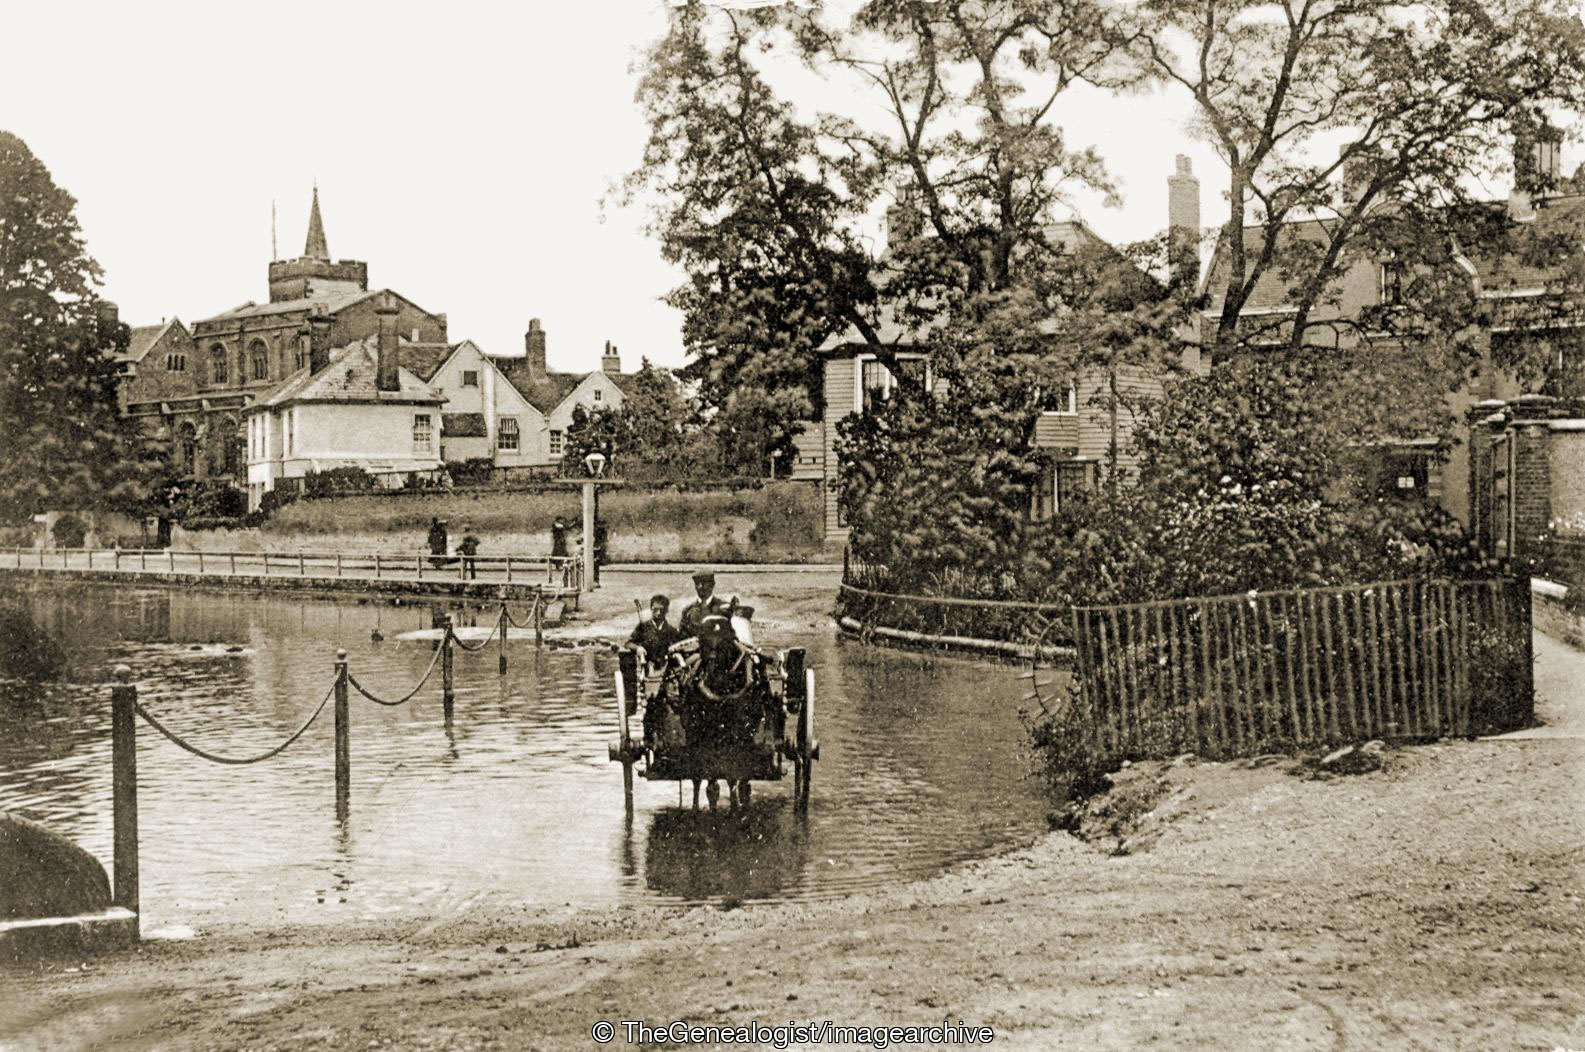 Nearby is Carshalton Church and Pond from TheGenealogist's Image Archive